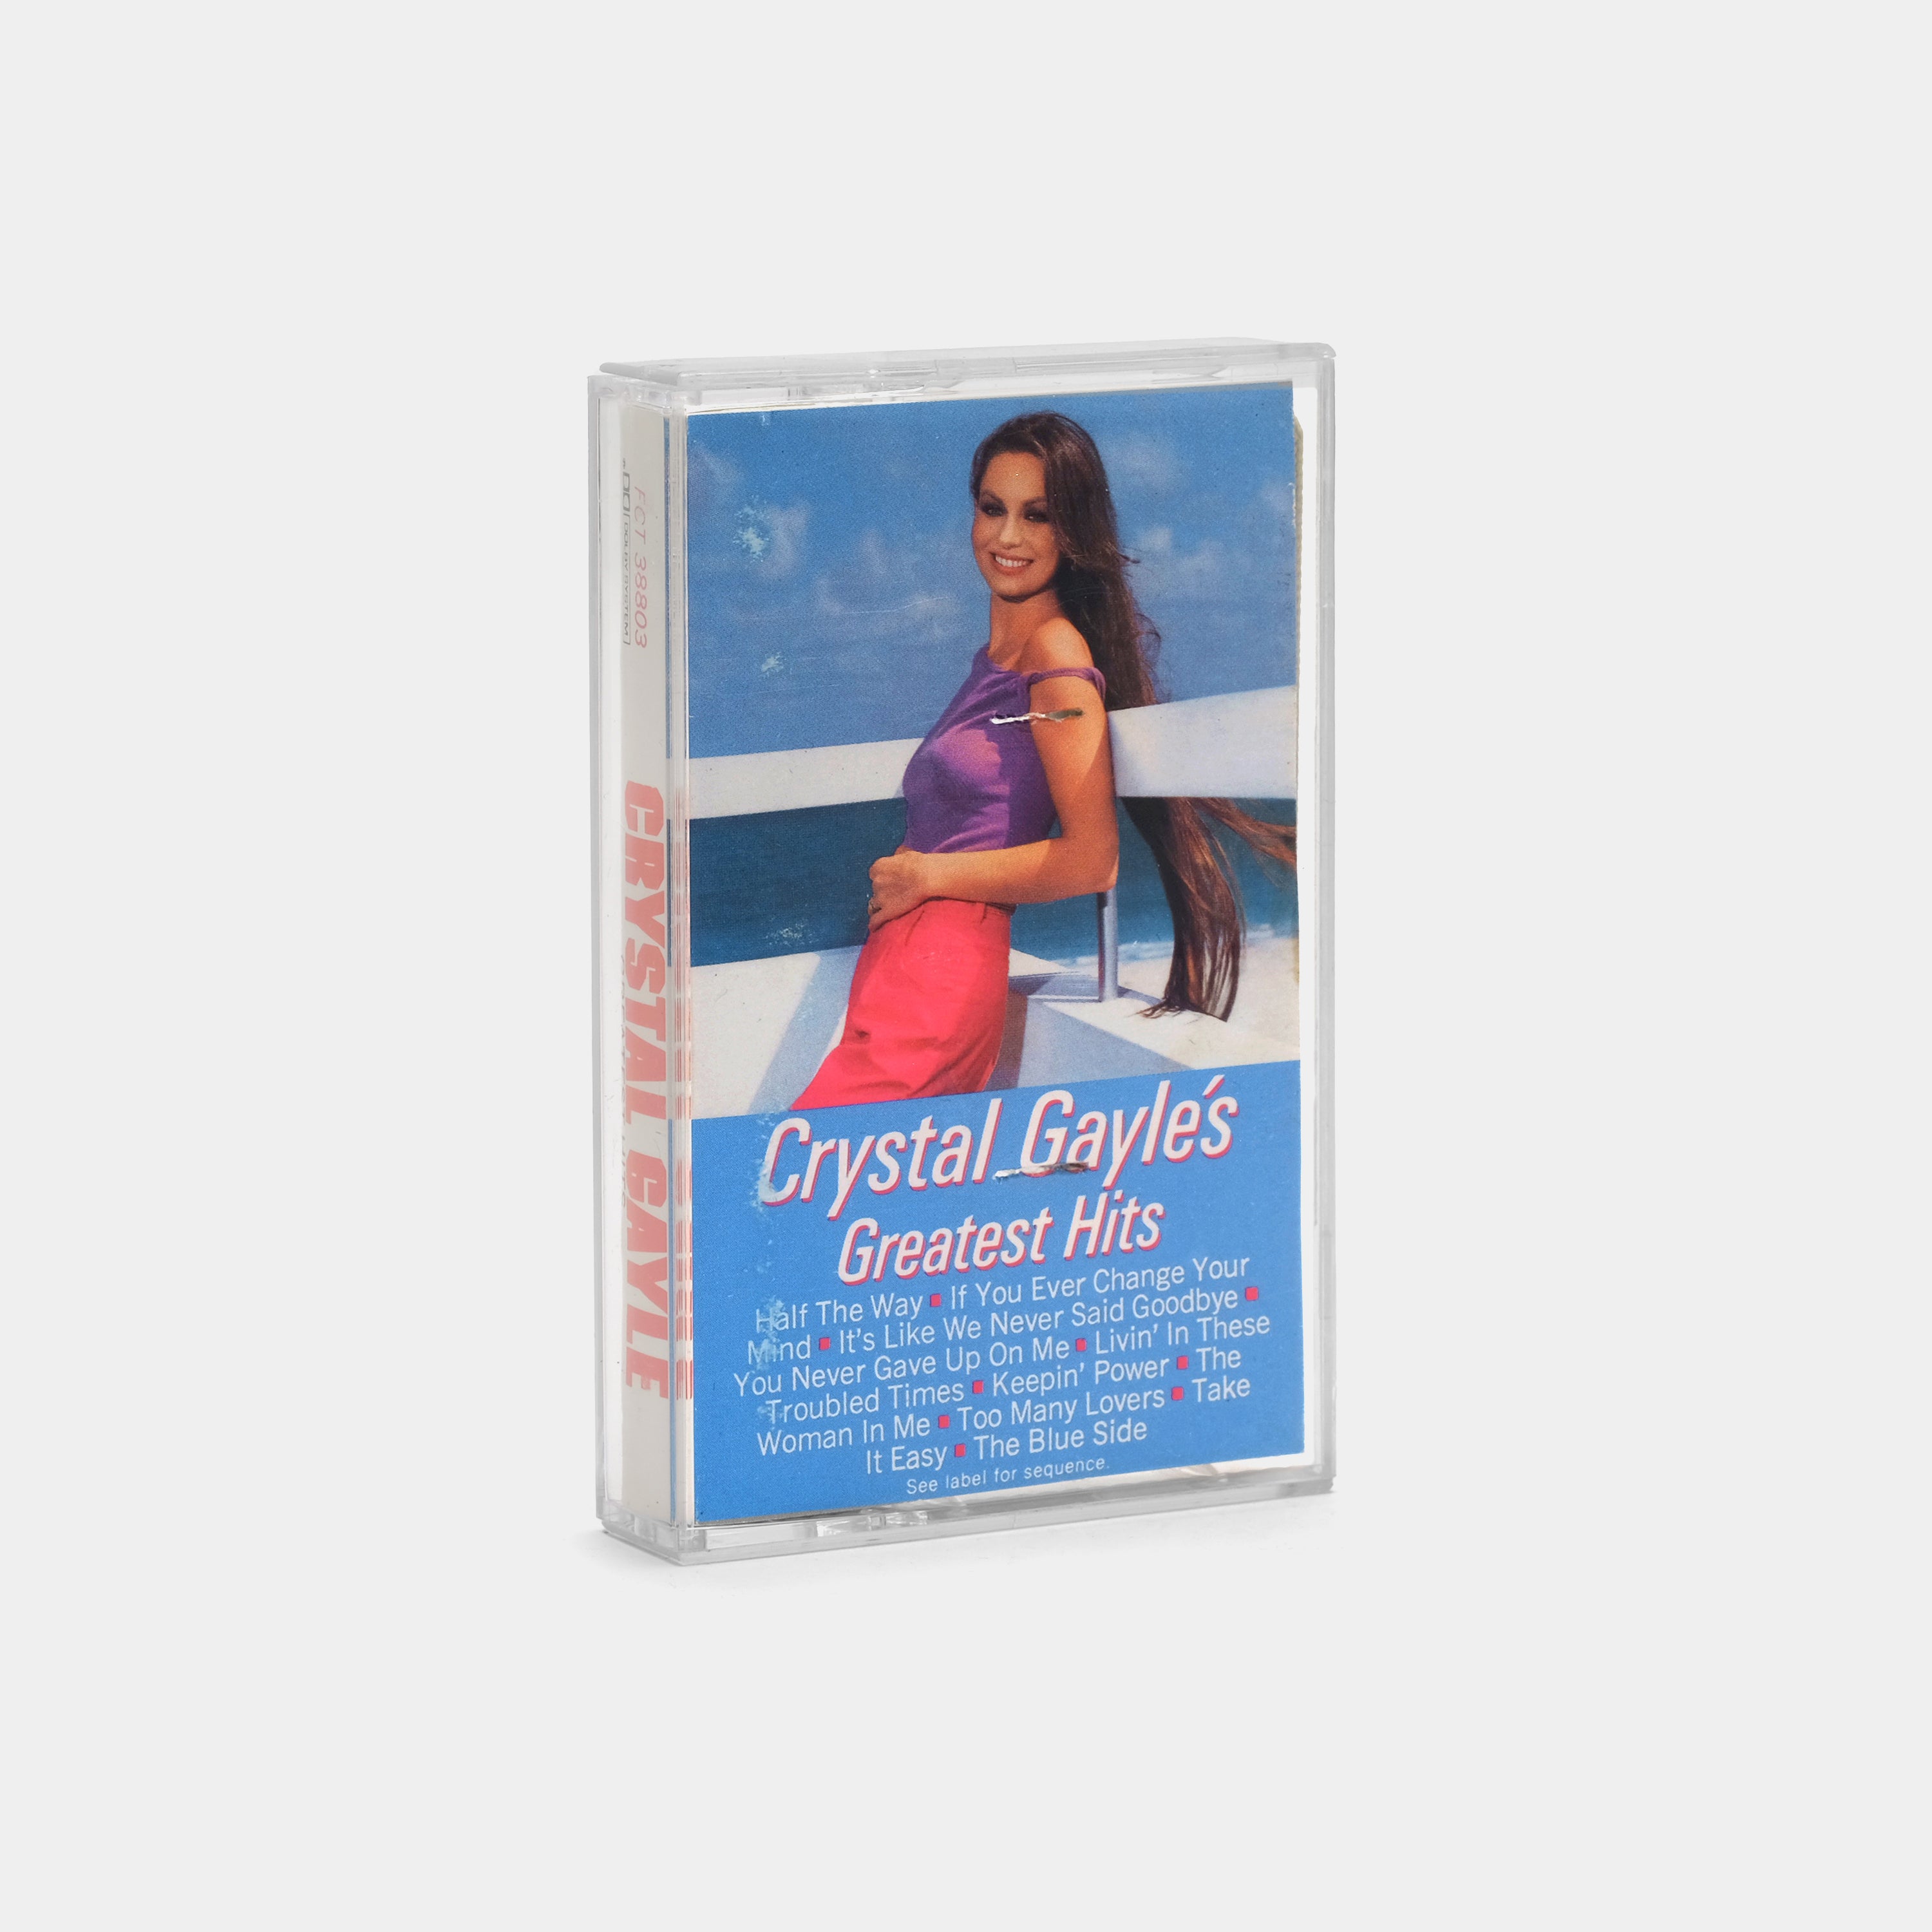 Crystal Gayle - Crystal Gayle's Greatest Hits Cassette Tape